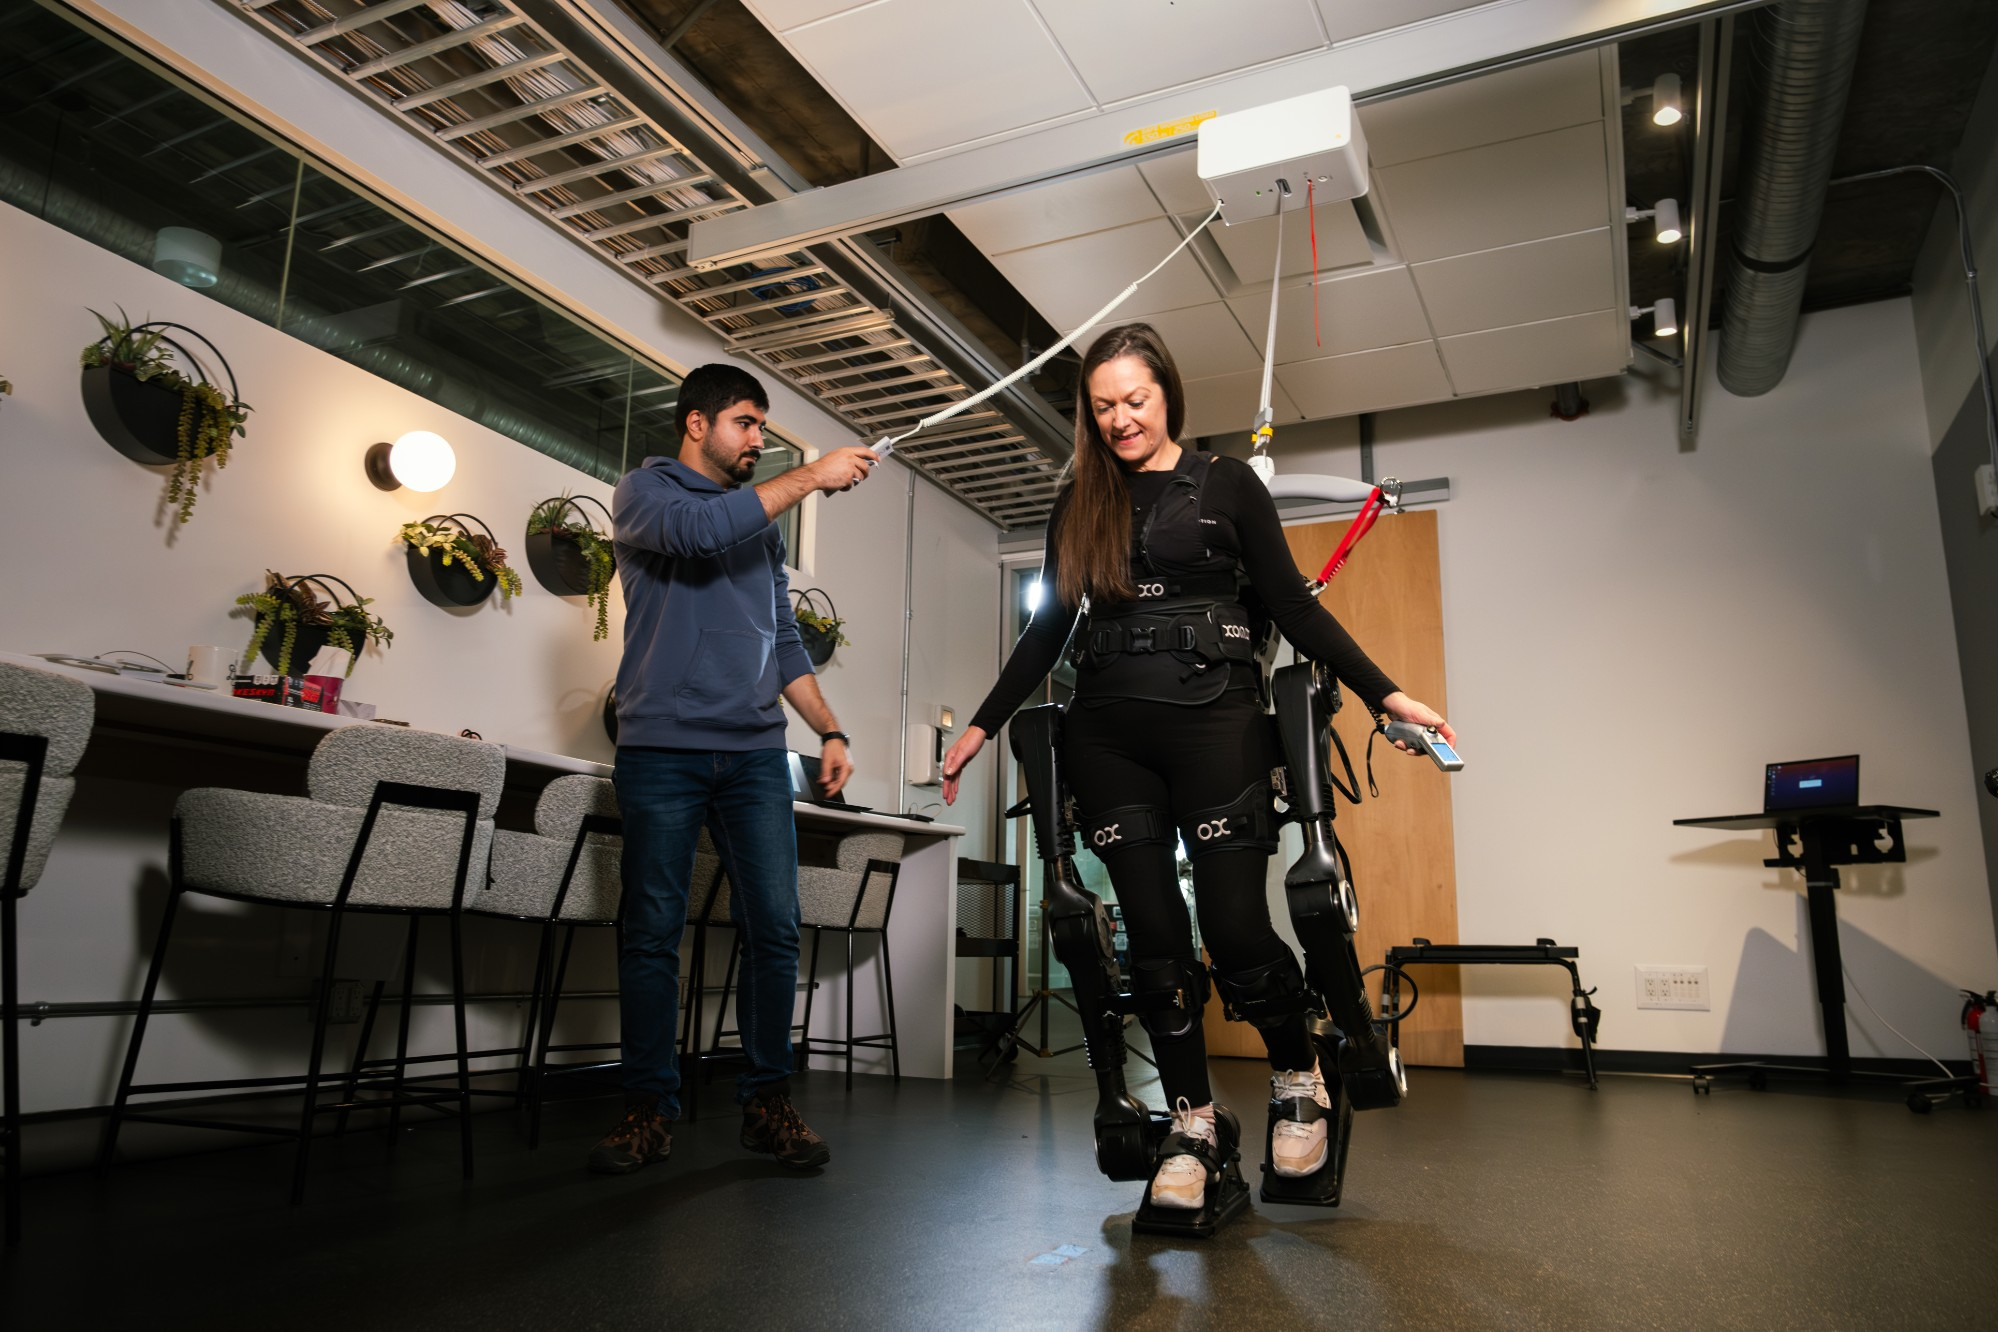 World's most advanced exoskeleton for the mobility challenged